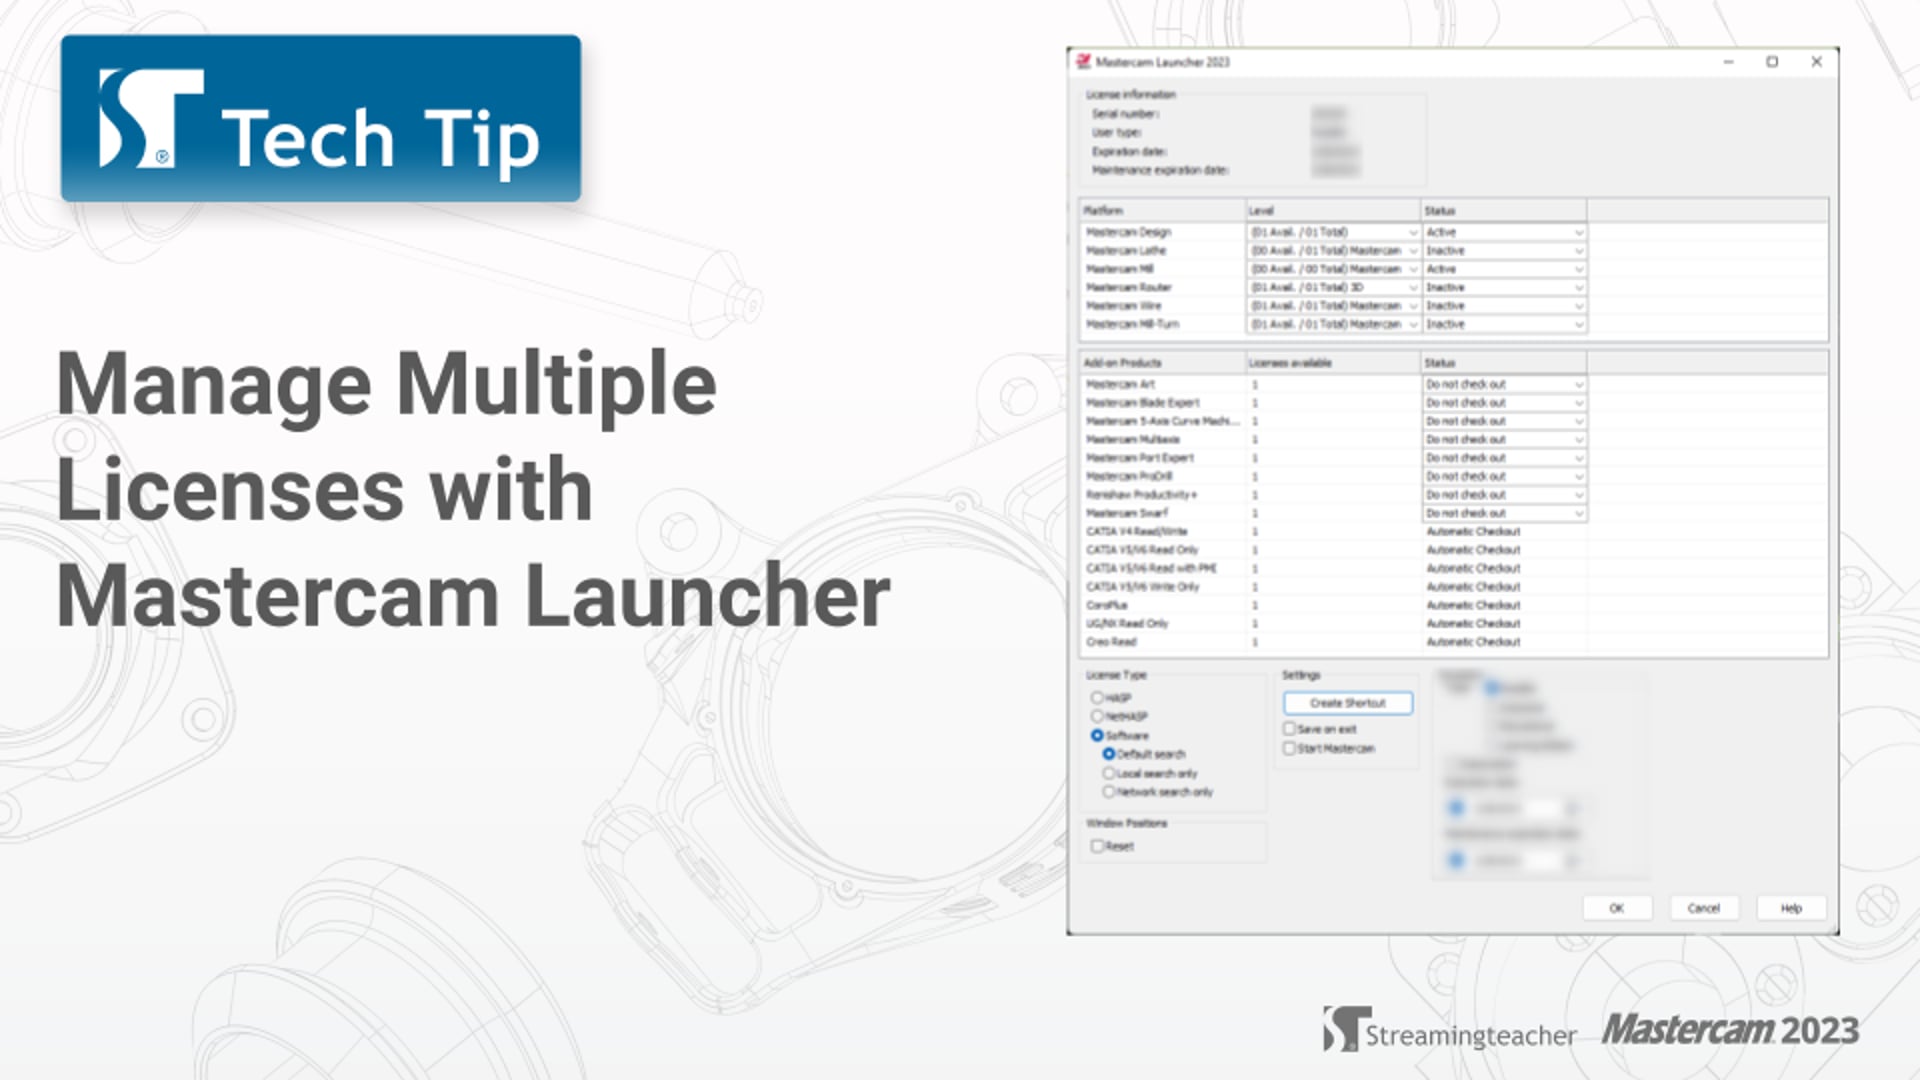 Manage Multiple Licenses with Mastercam Launcher